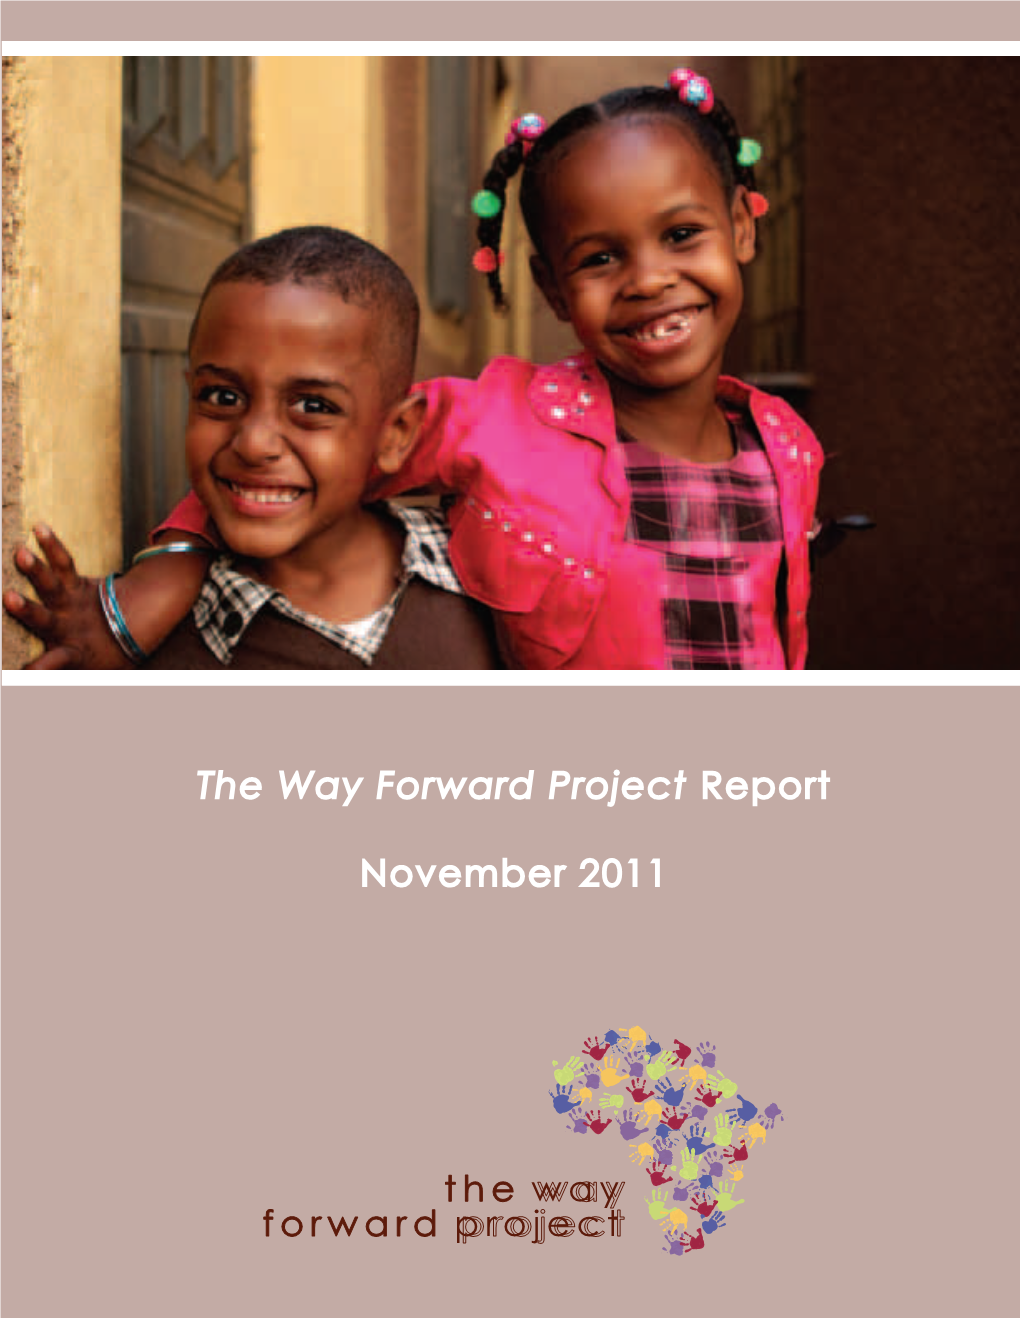 The Way Forward Project Report